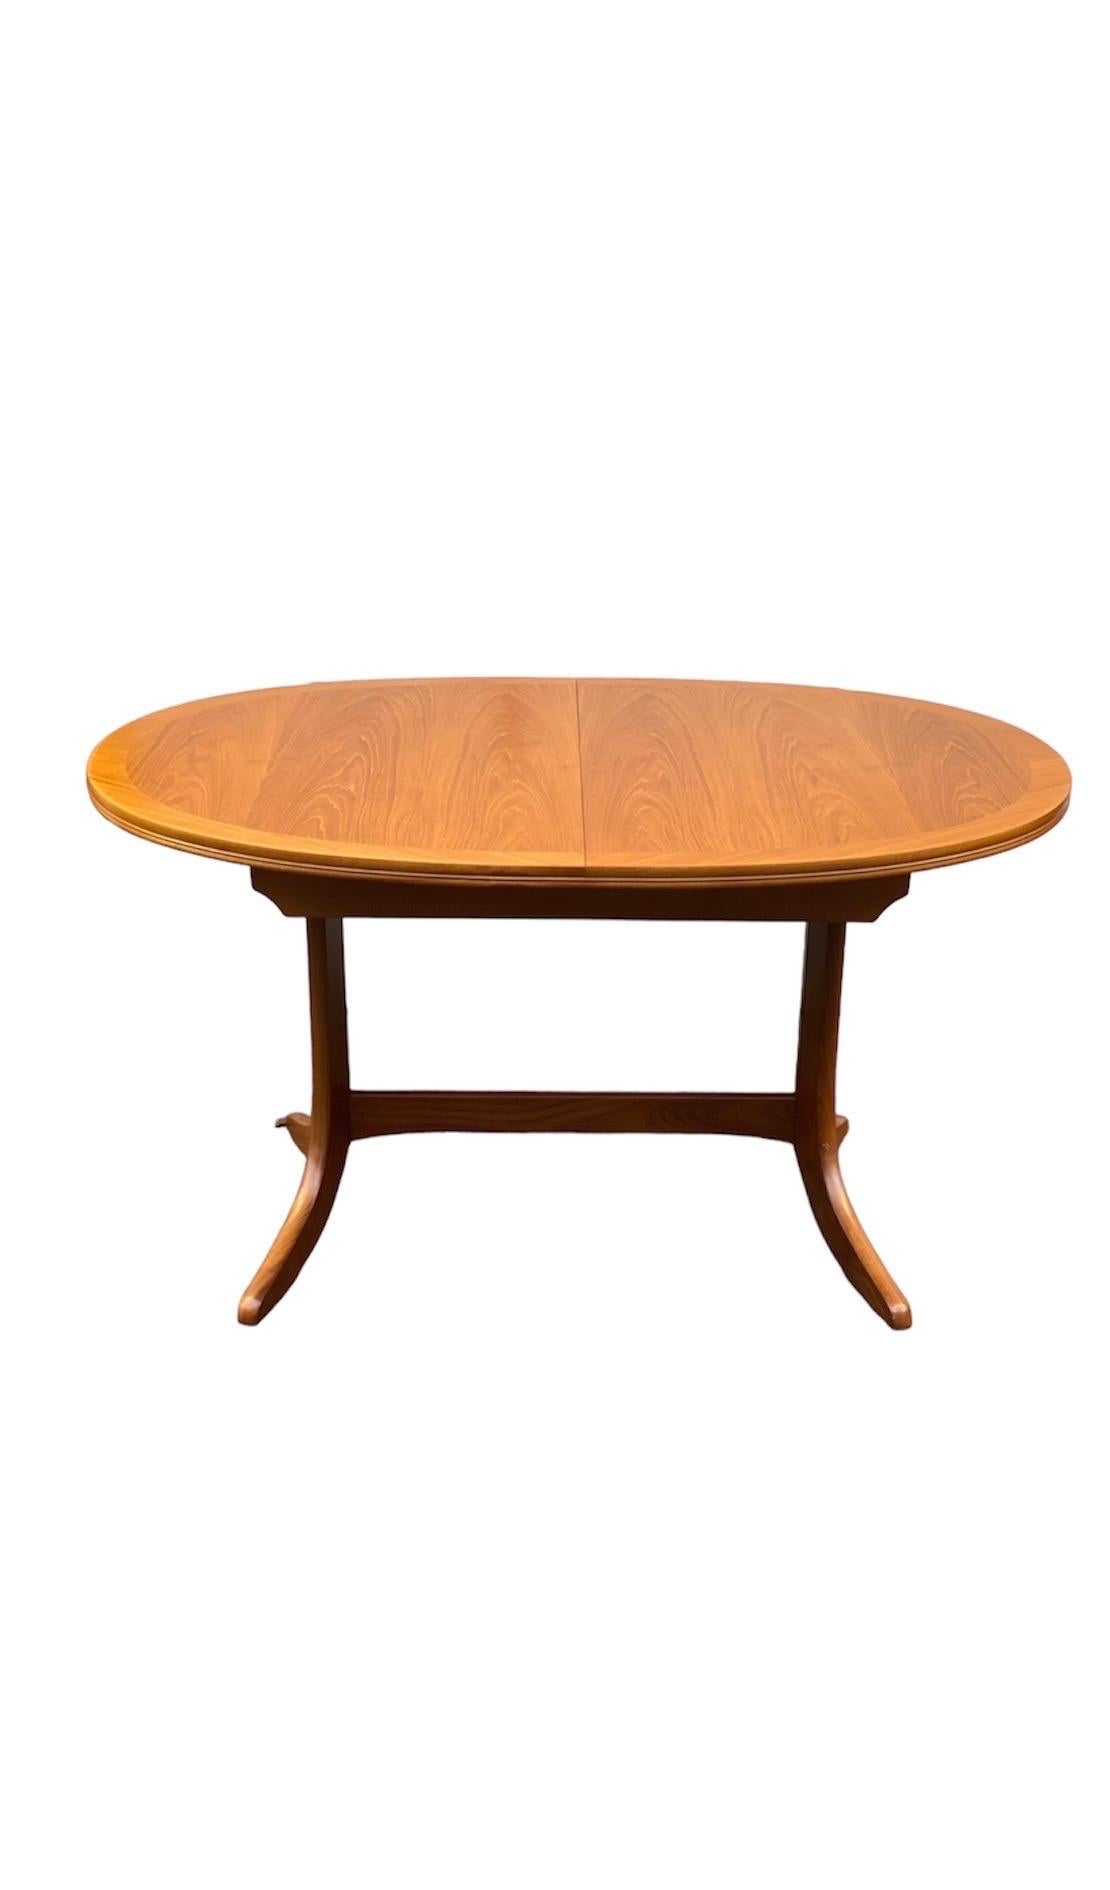 (Available by Online Purchase Only)

Vintage Mid-Century Modern dining table with butterfly leaf. UK Import.

Dimensions. 53 W ; 36 D ; 29 1/2 H.